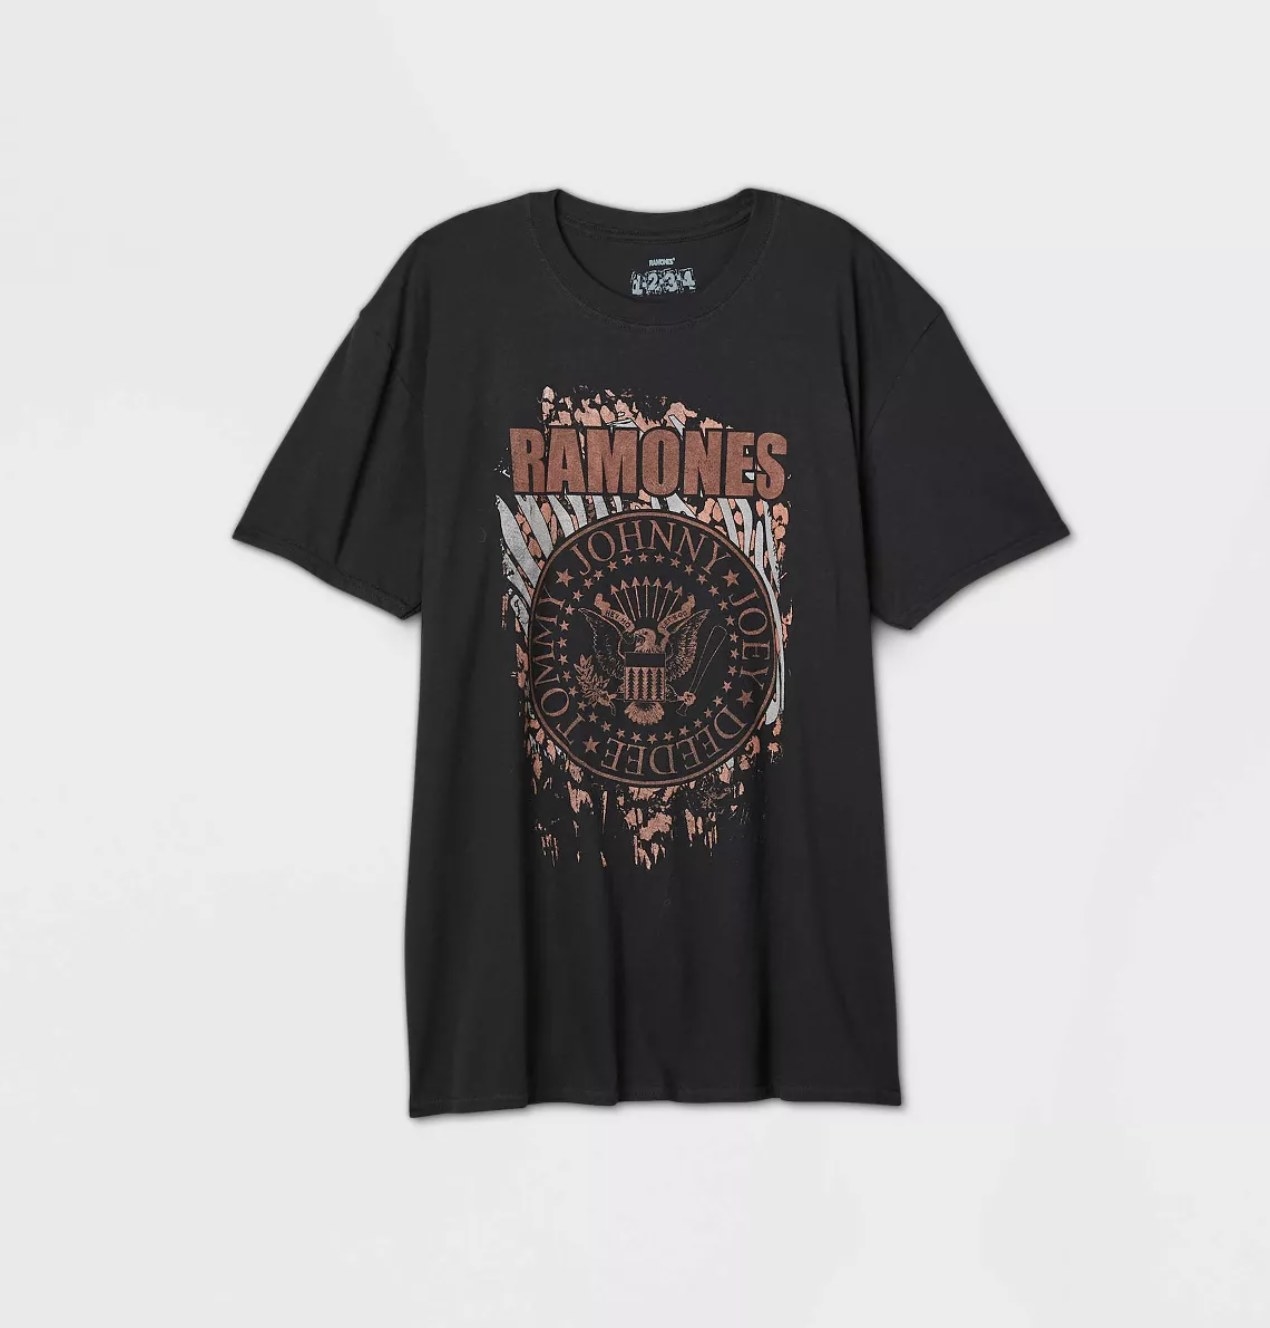 A black graphic tee of the Ramones